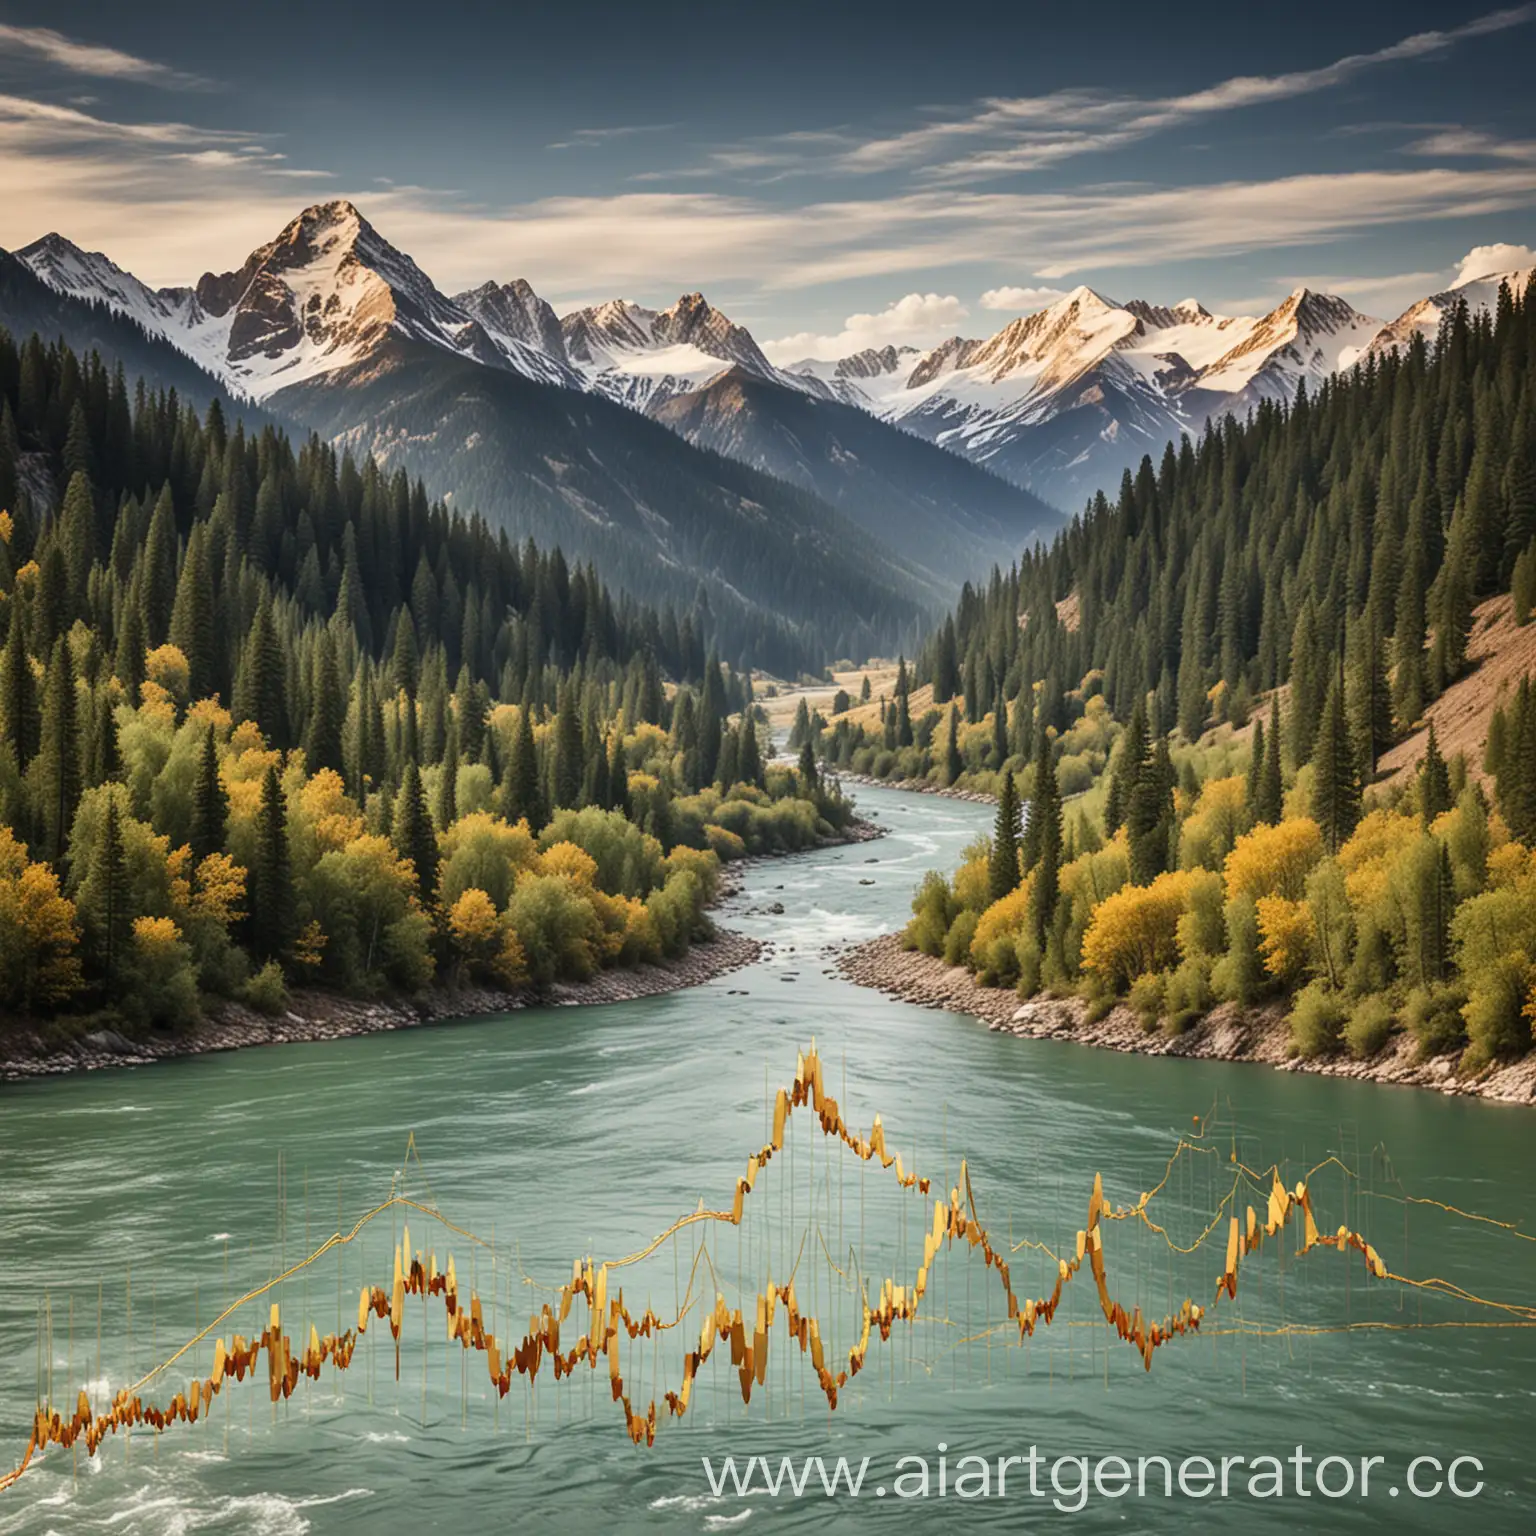 Economic-Graphs-and-Mountain-Scenery-with-River-and-Placer-Gold